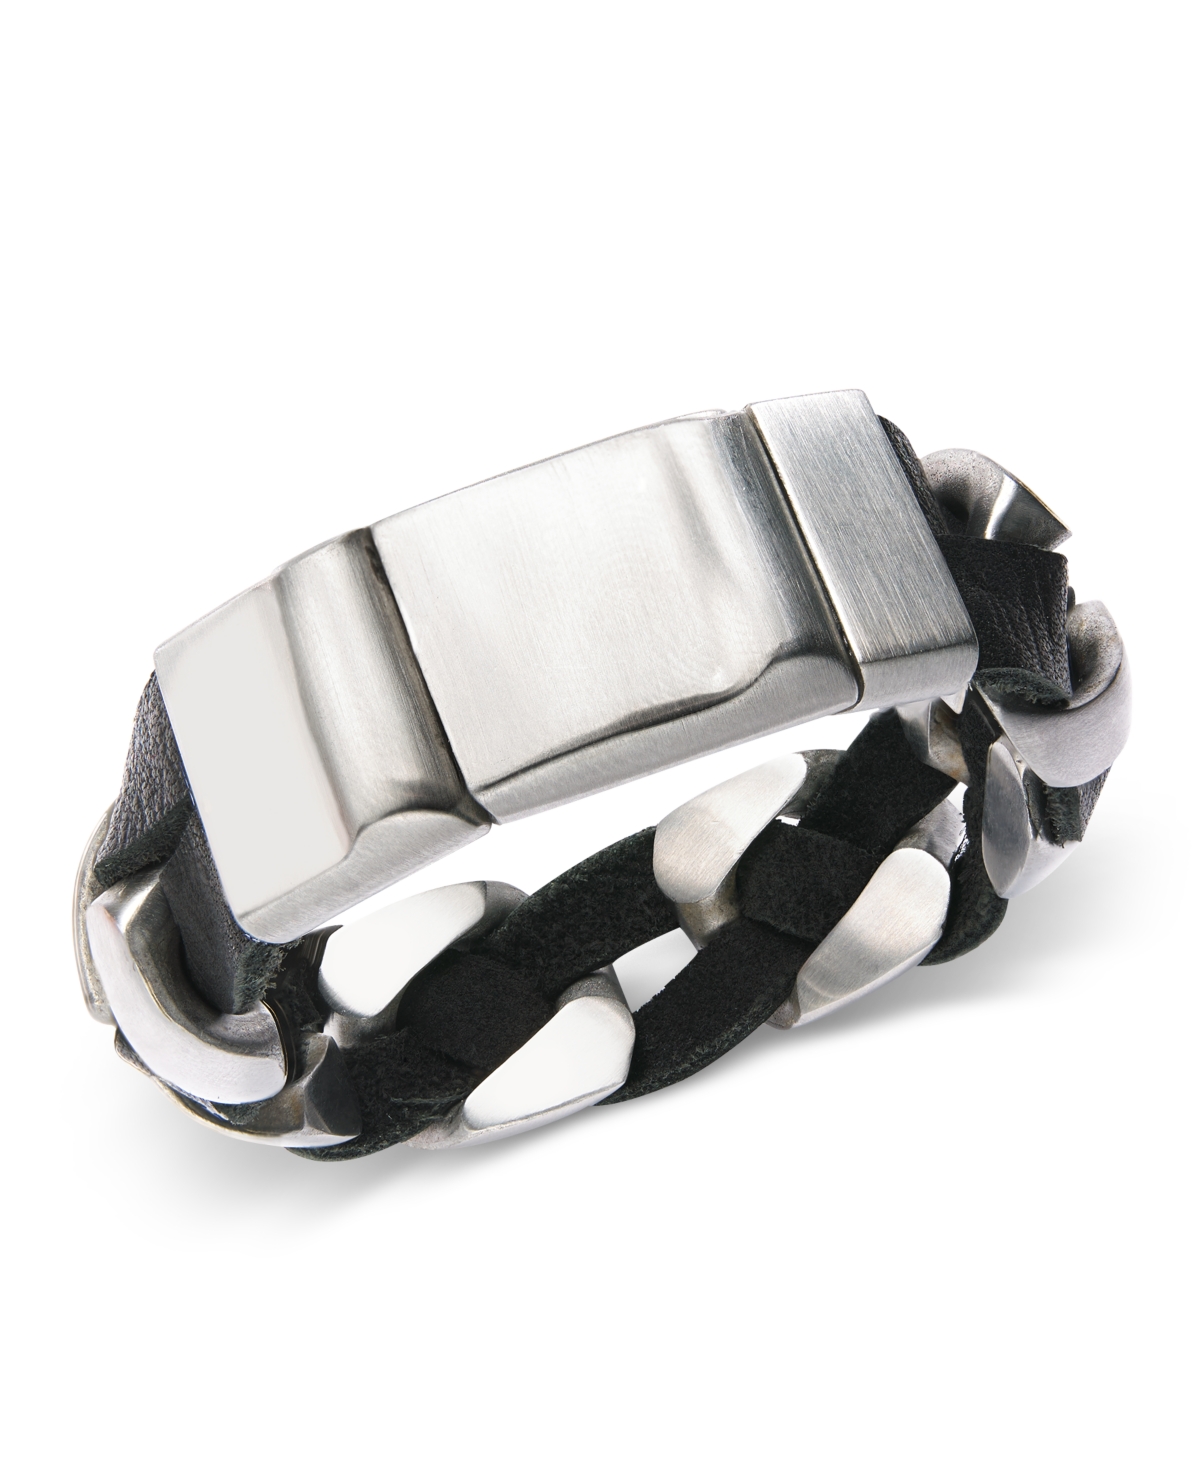 Stainless Steel and Black Leather Chain Bracelet - Silver